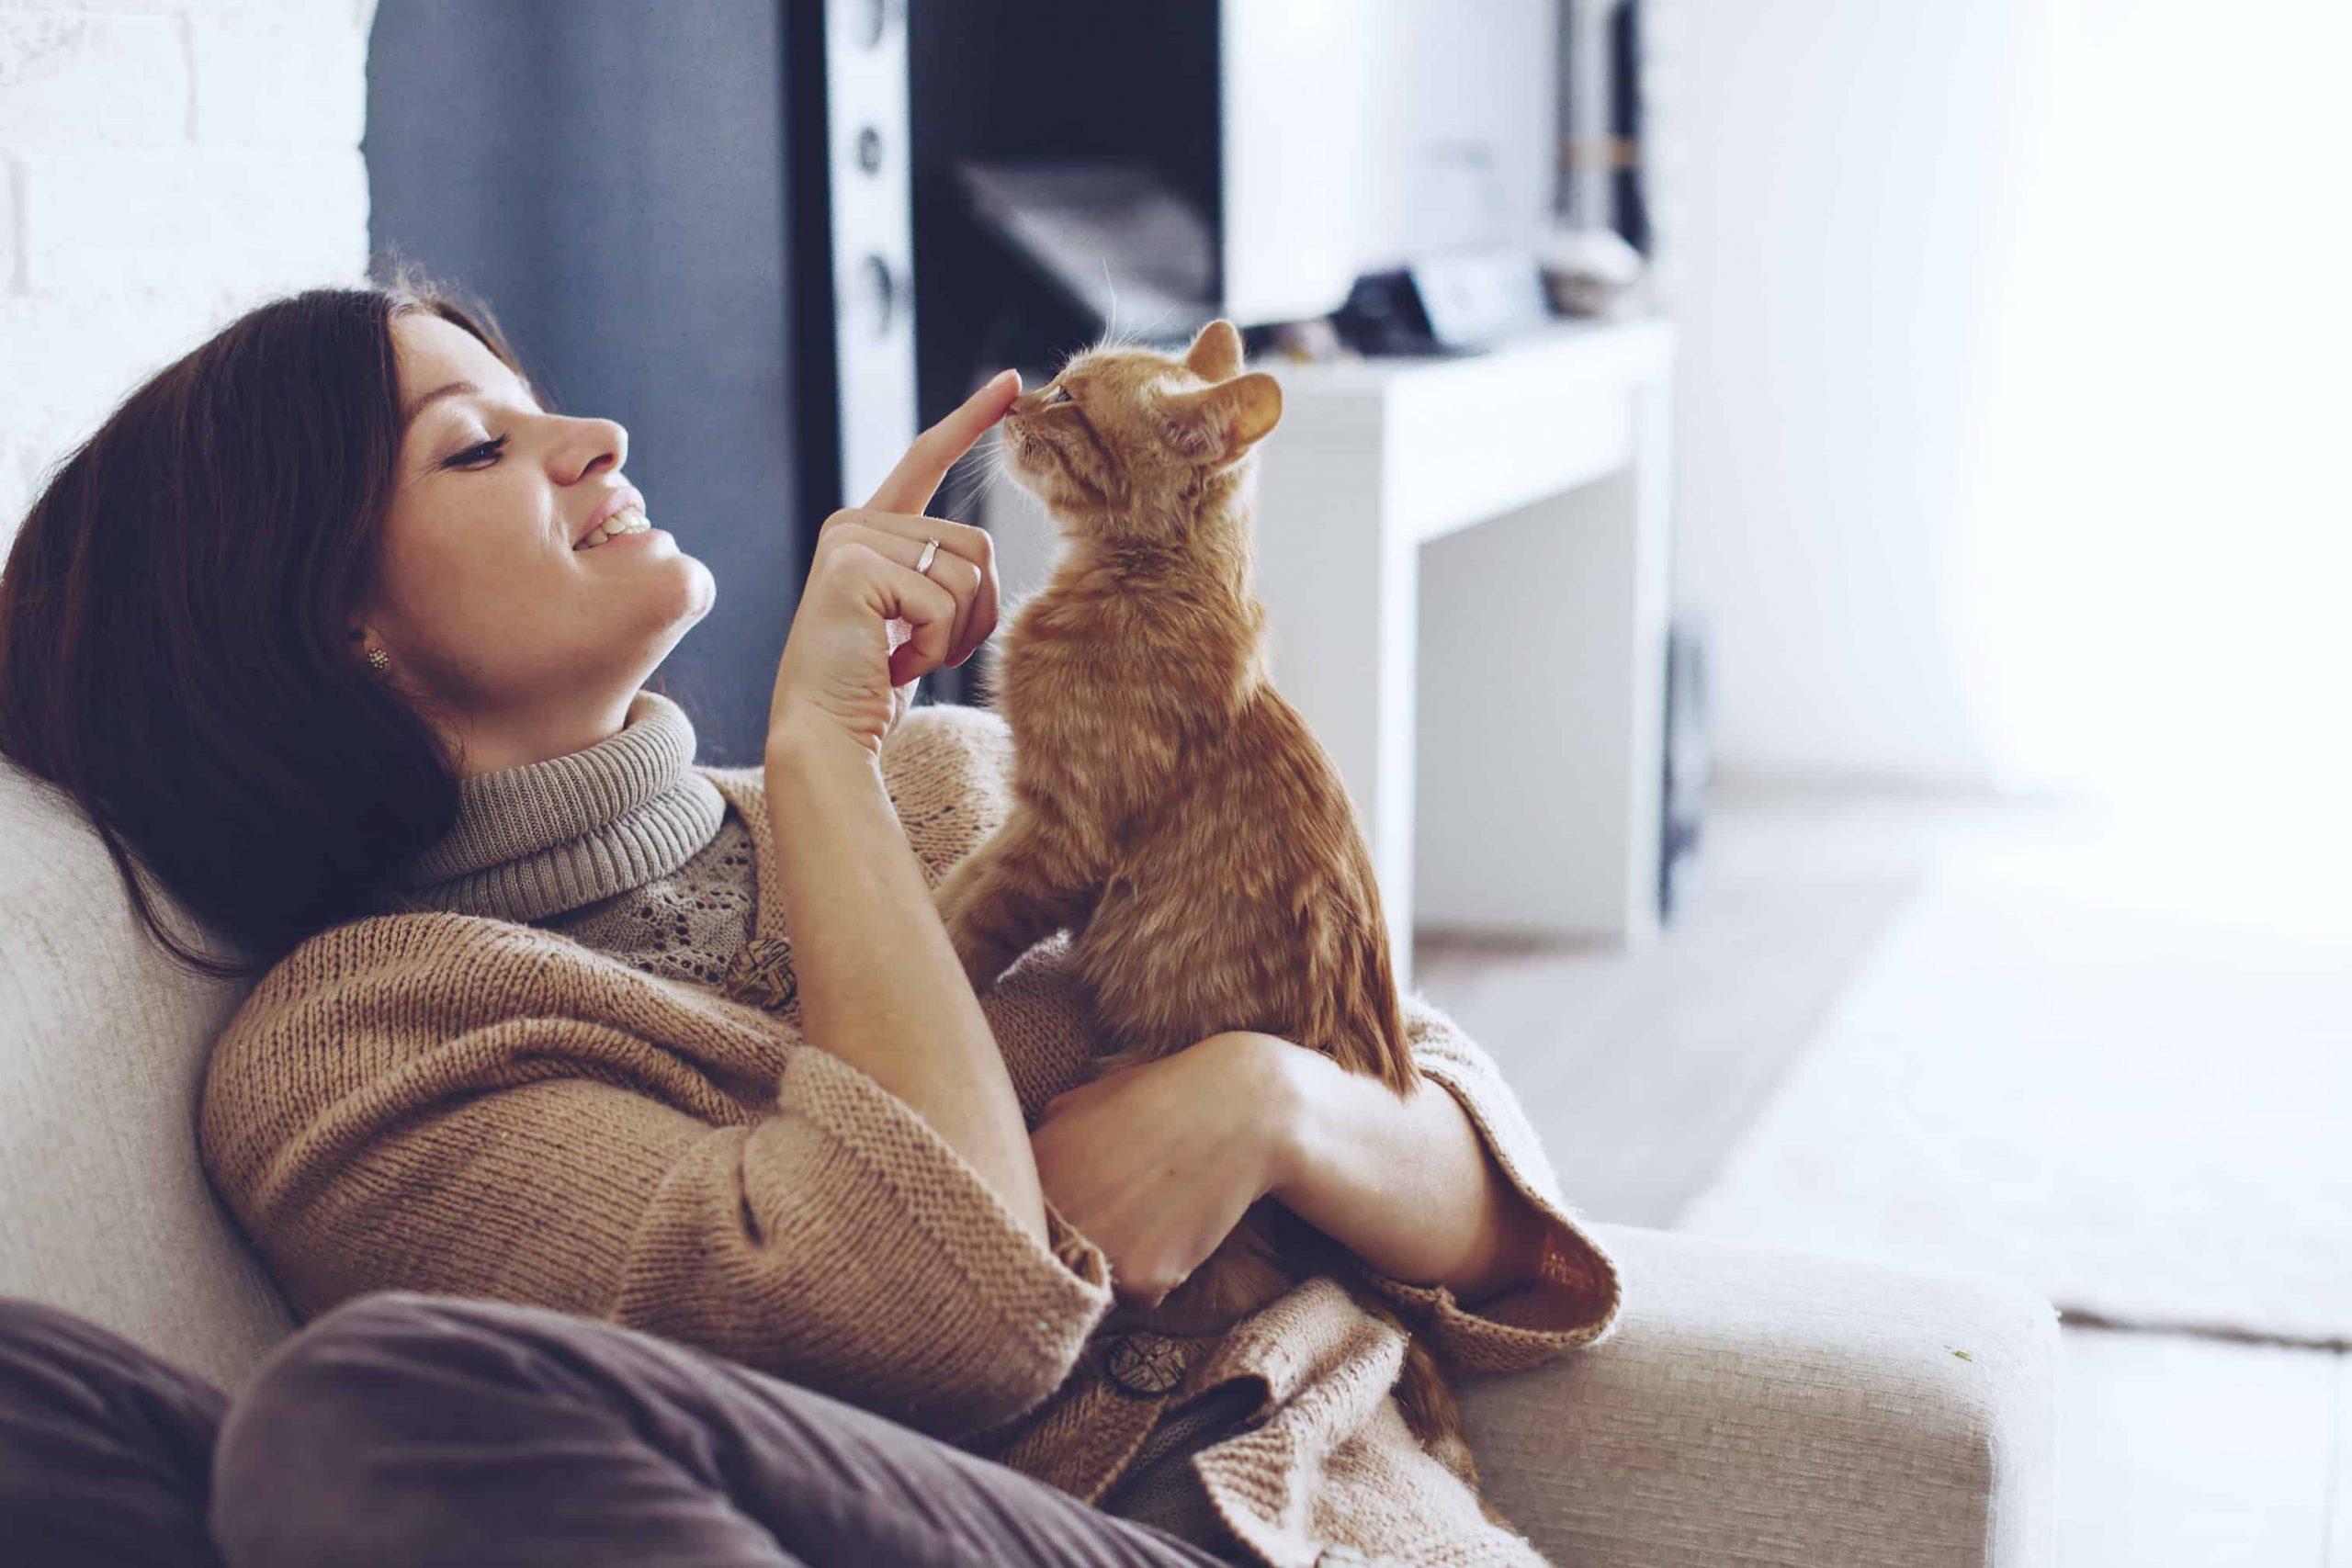 Pet Insurance vs Savings Account - a lady with a brown cat image